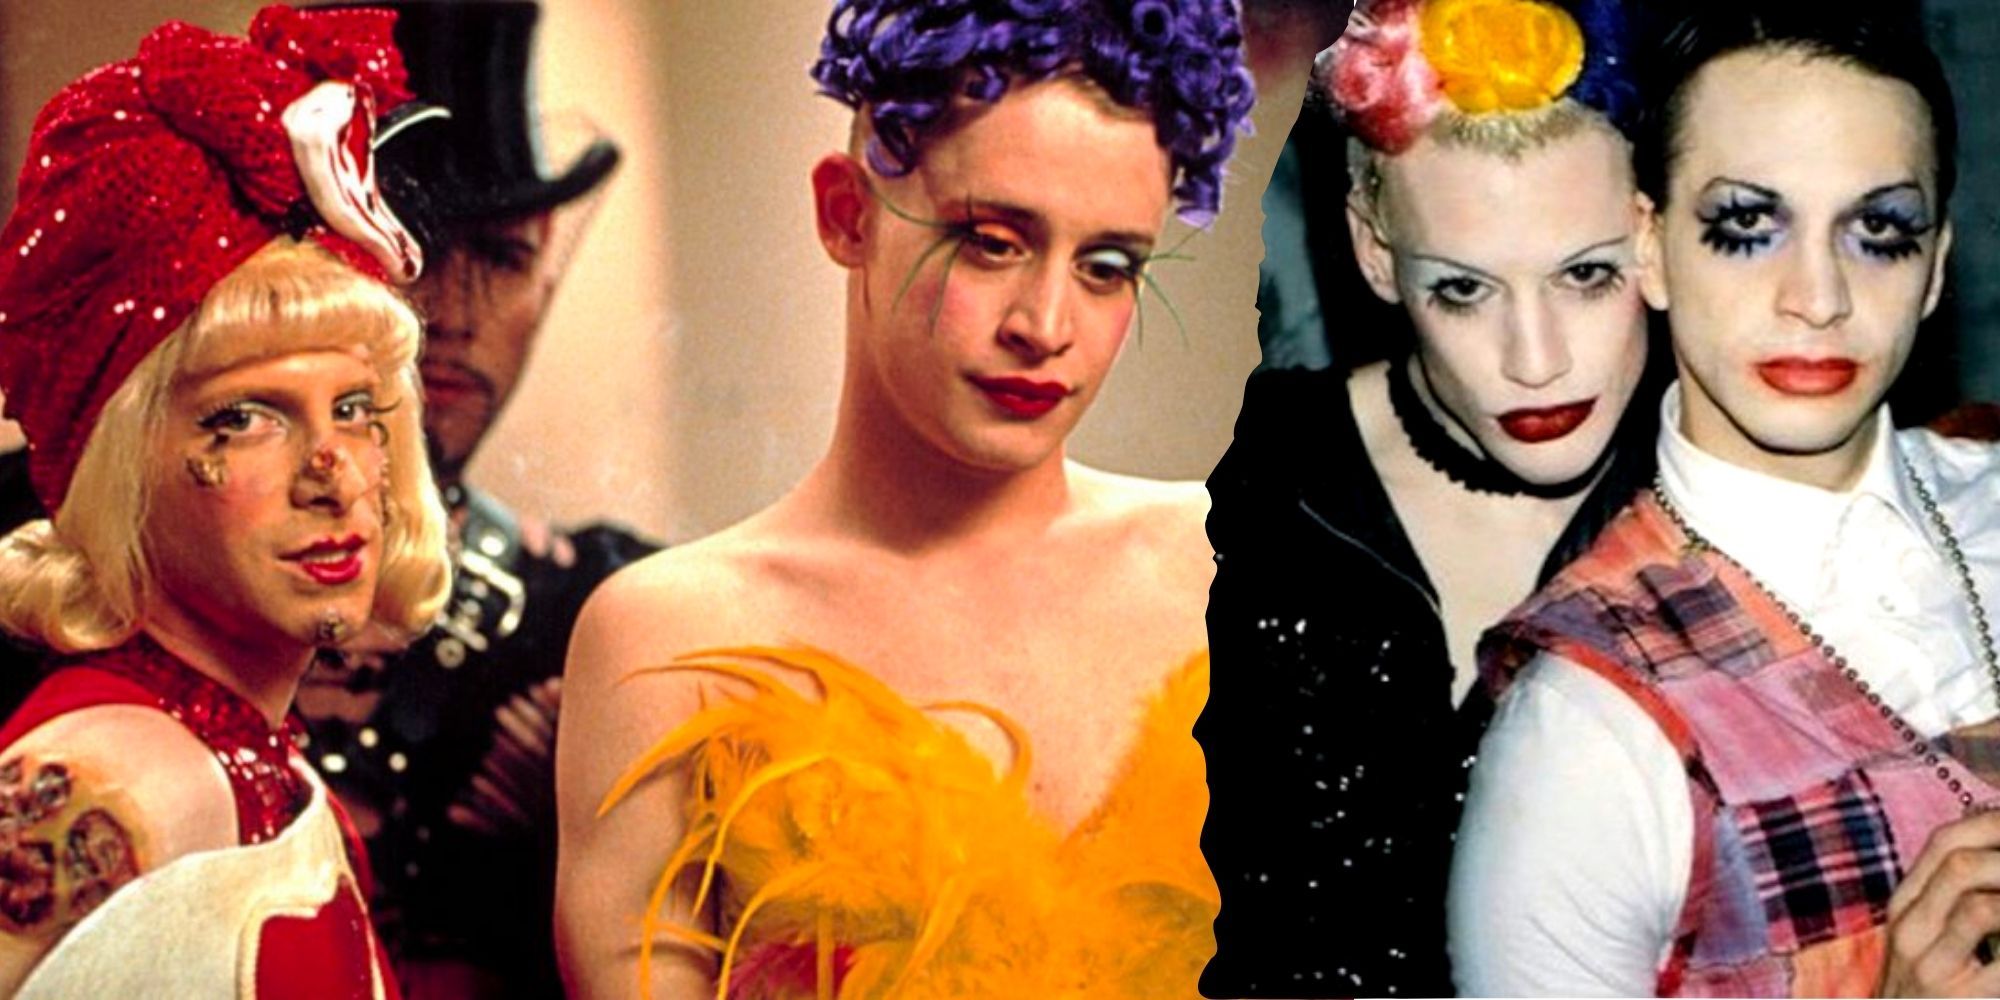 James St James and Michael Alig as portrays in Party Monsters by Seth Green and Macaulay Culkin